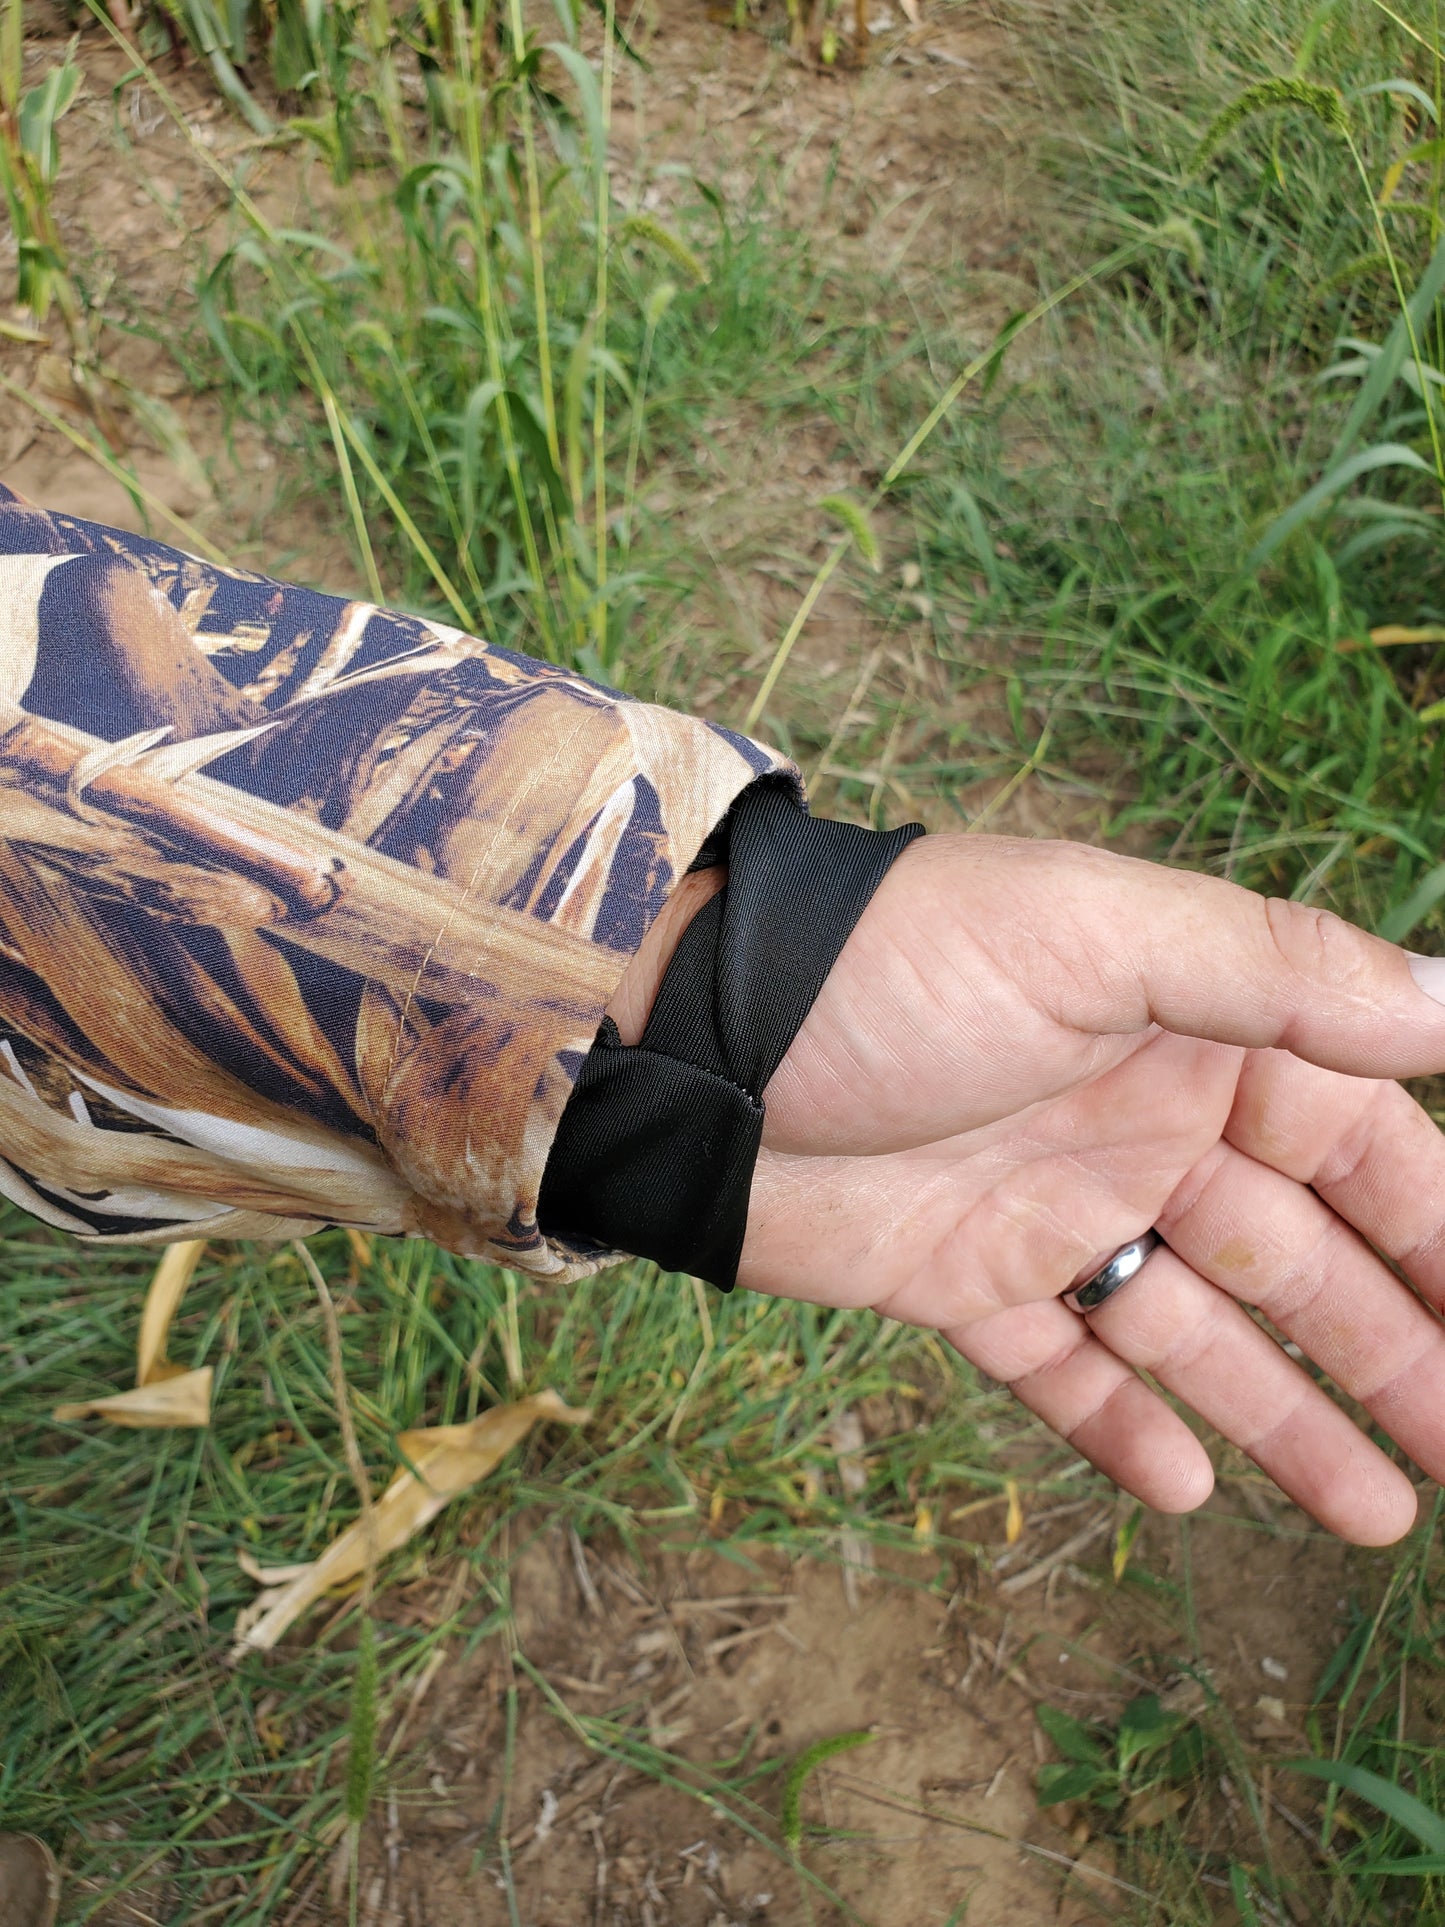 FALL CORN STALK - "HELL YES! Series" - Water Resistant, Mid-weight Jacket